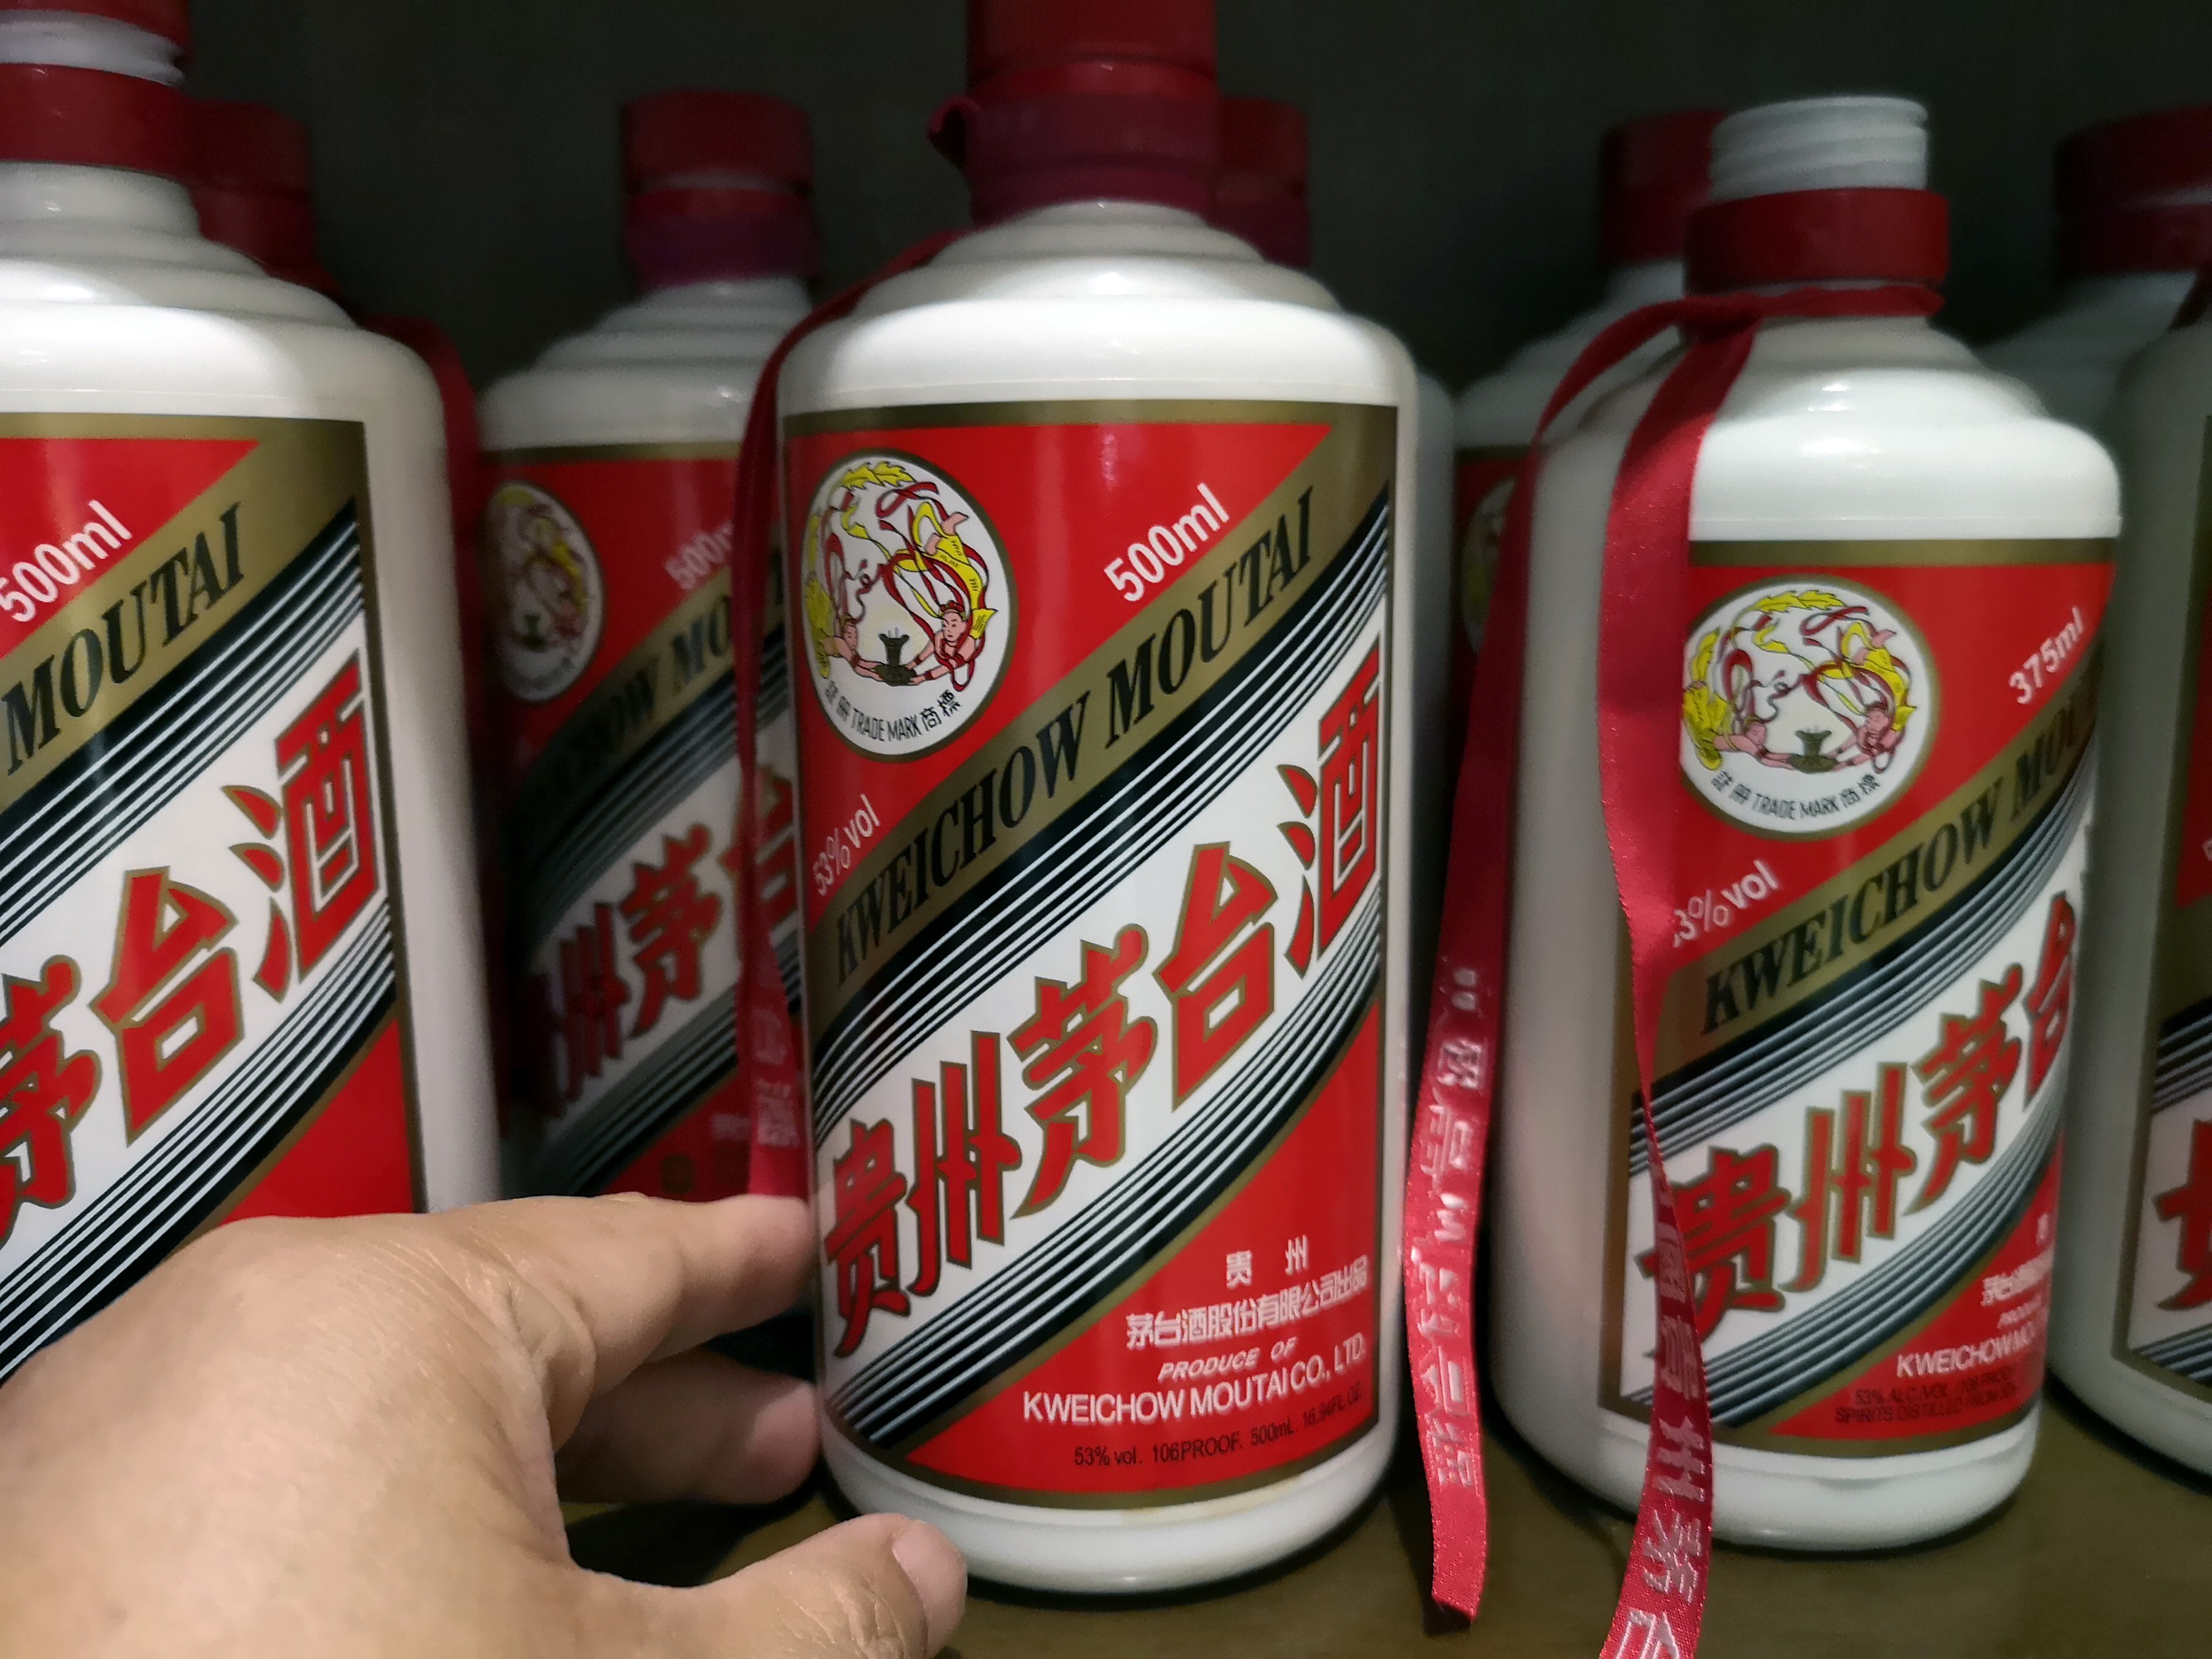 Bottles of Chinese white wine, Kweichow Moutai, are pictured on a shelf at a restaurant in Harbin city, in the northeastern Chinese province of Heilongjiang. Photo: Simon Song